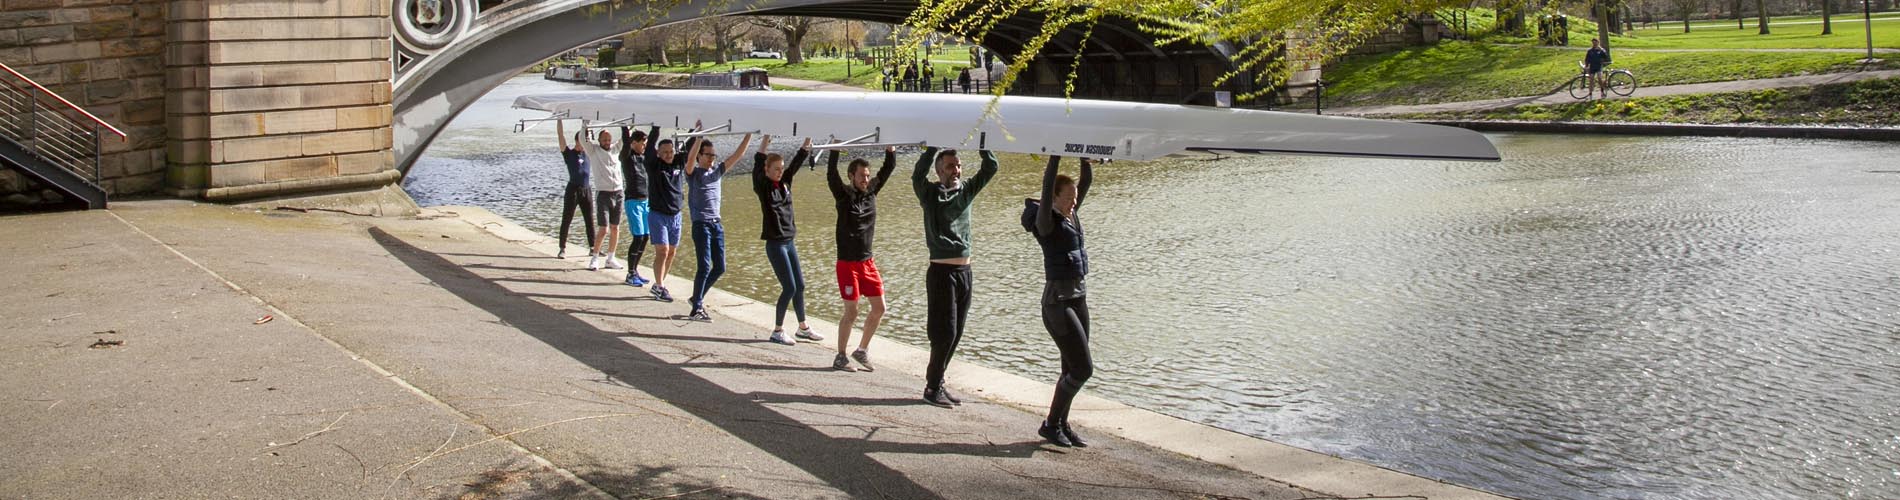 Group of people carrying an upturned boat by the River Cam